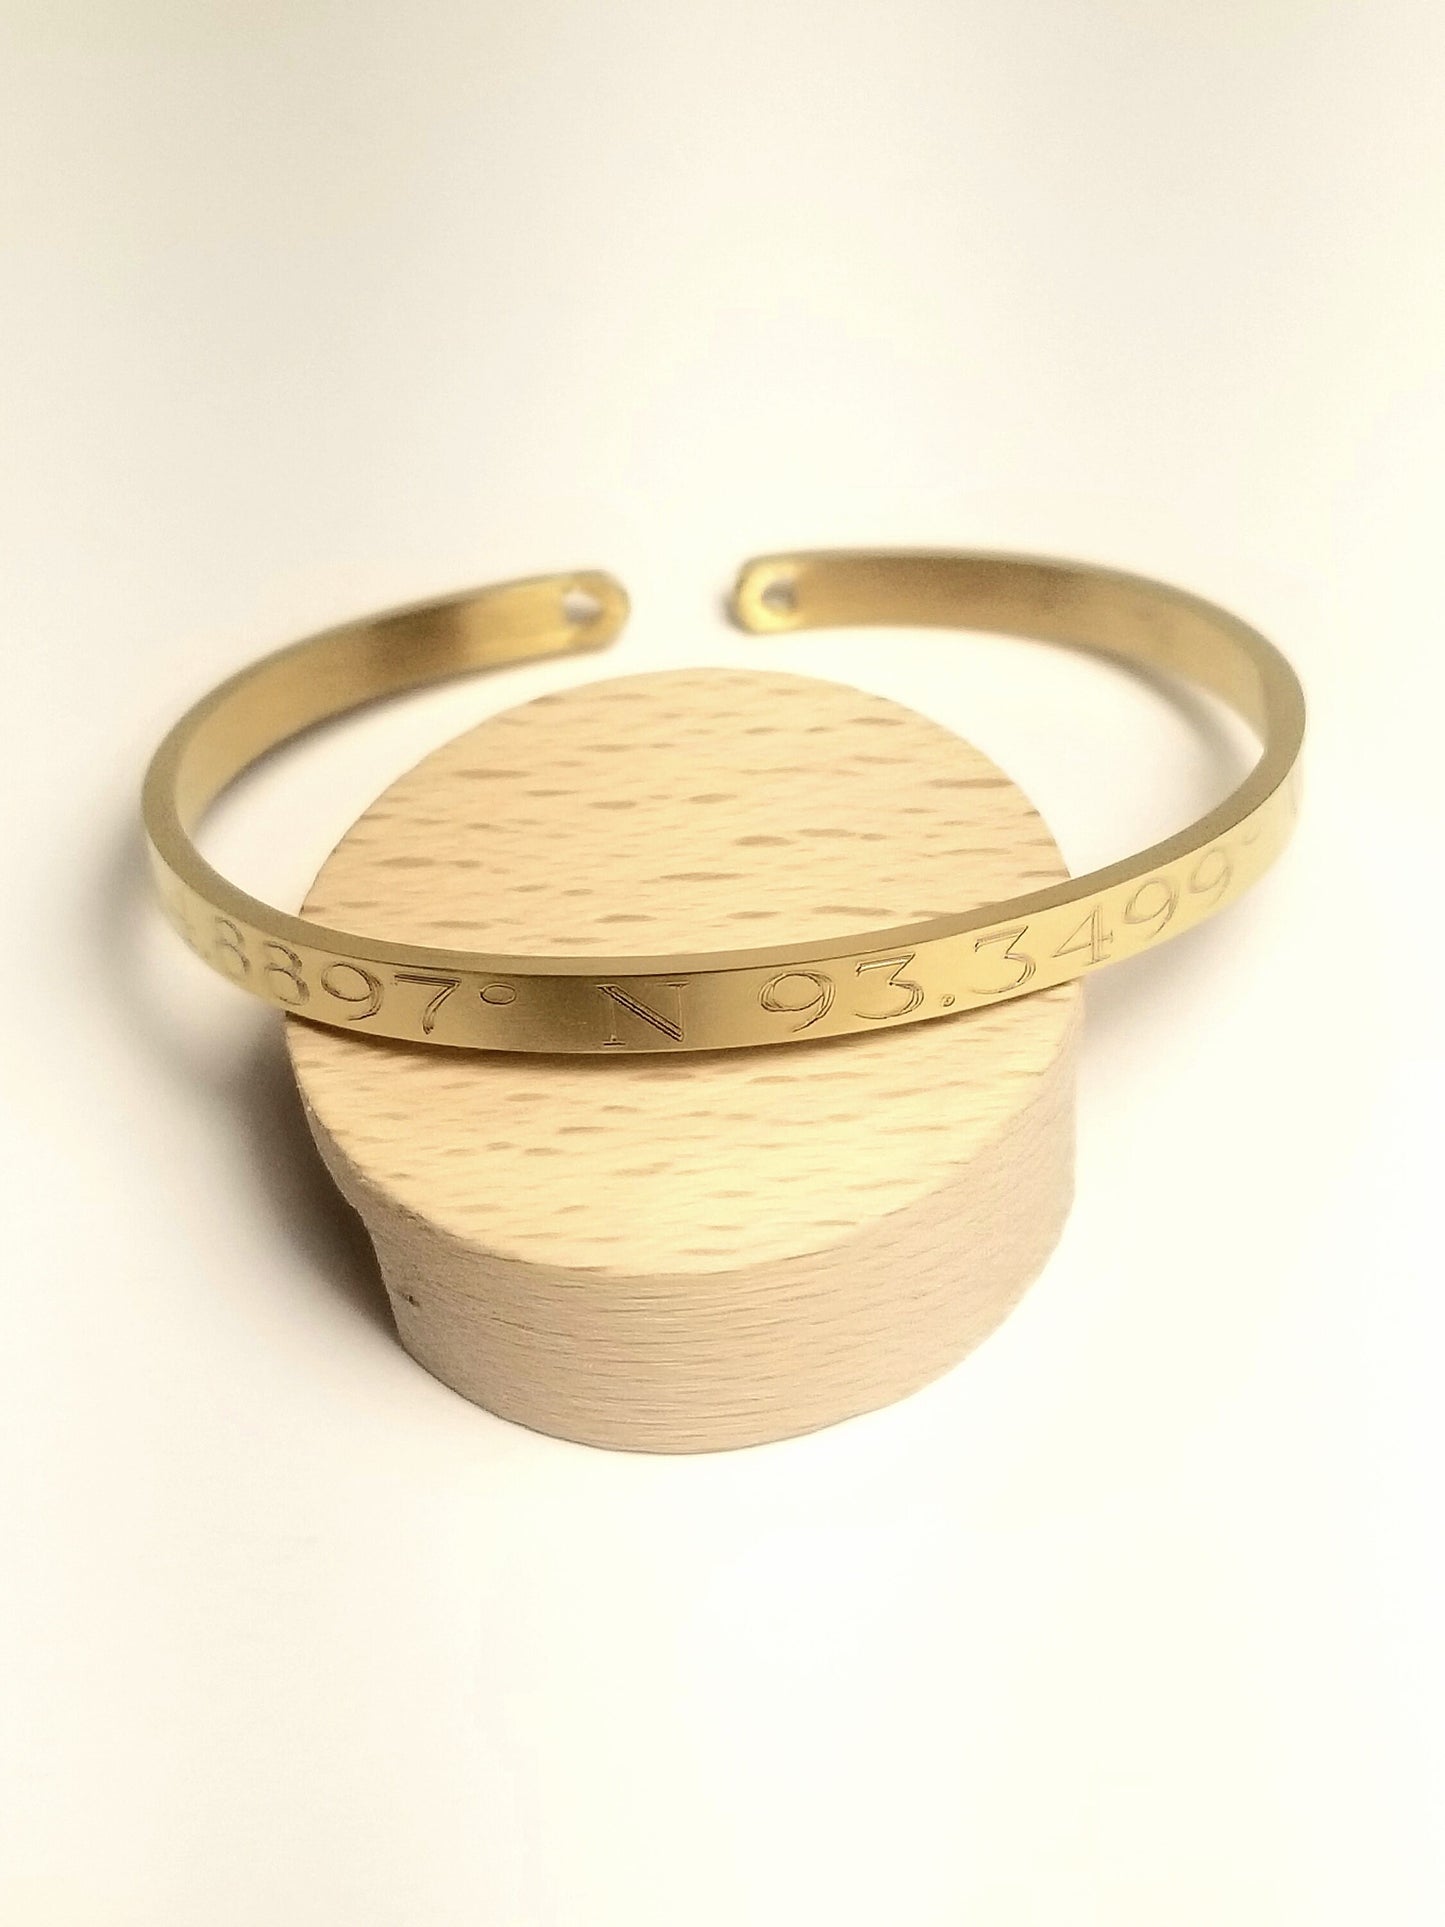 Personalized engraving on cuff bracelet in silver, gold, rose gold